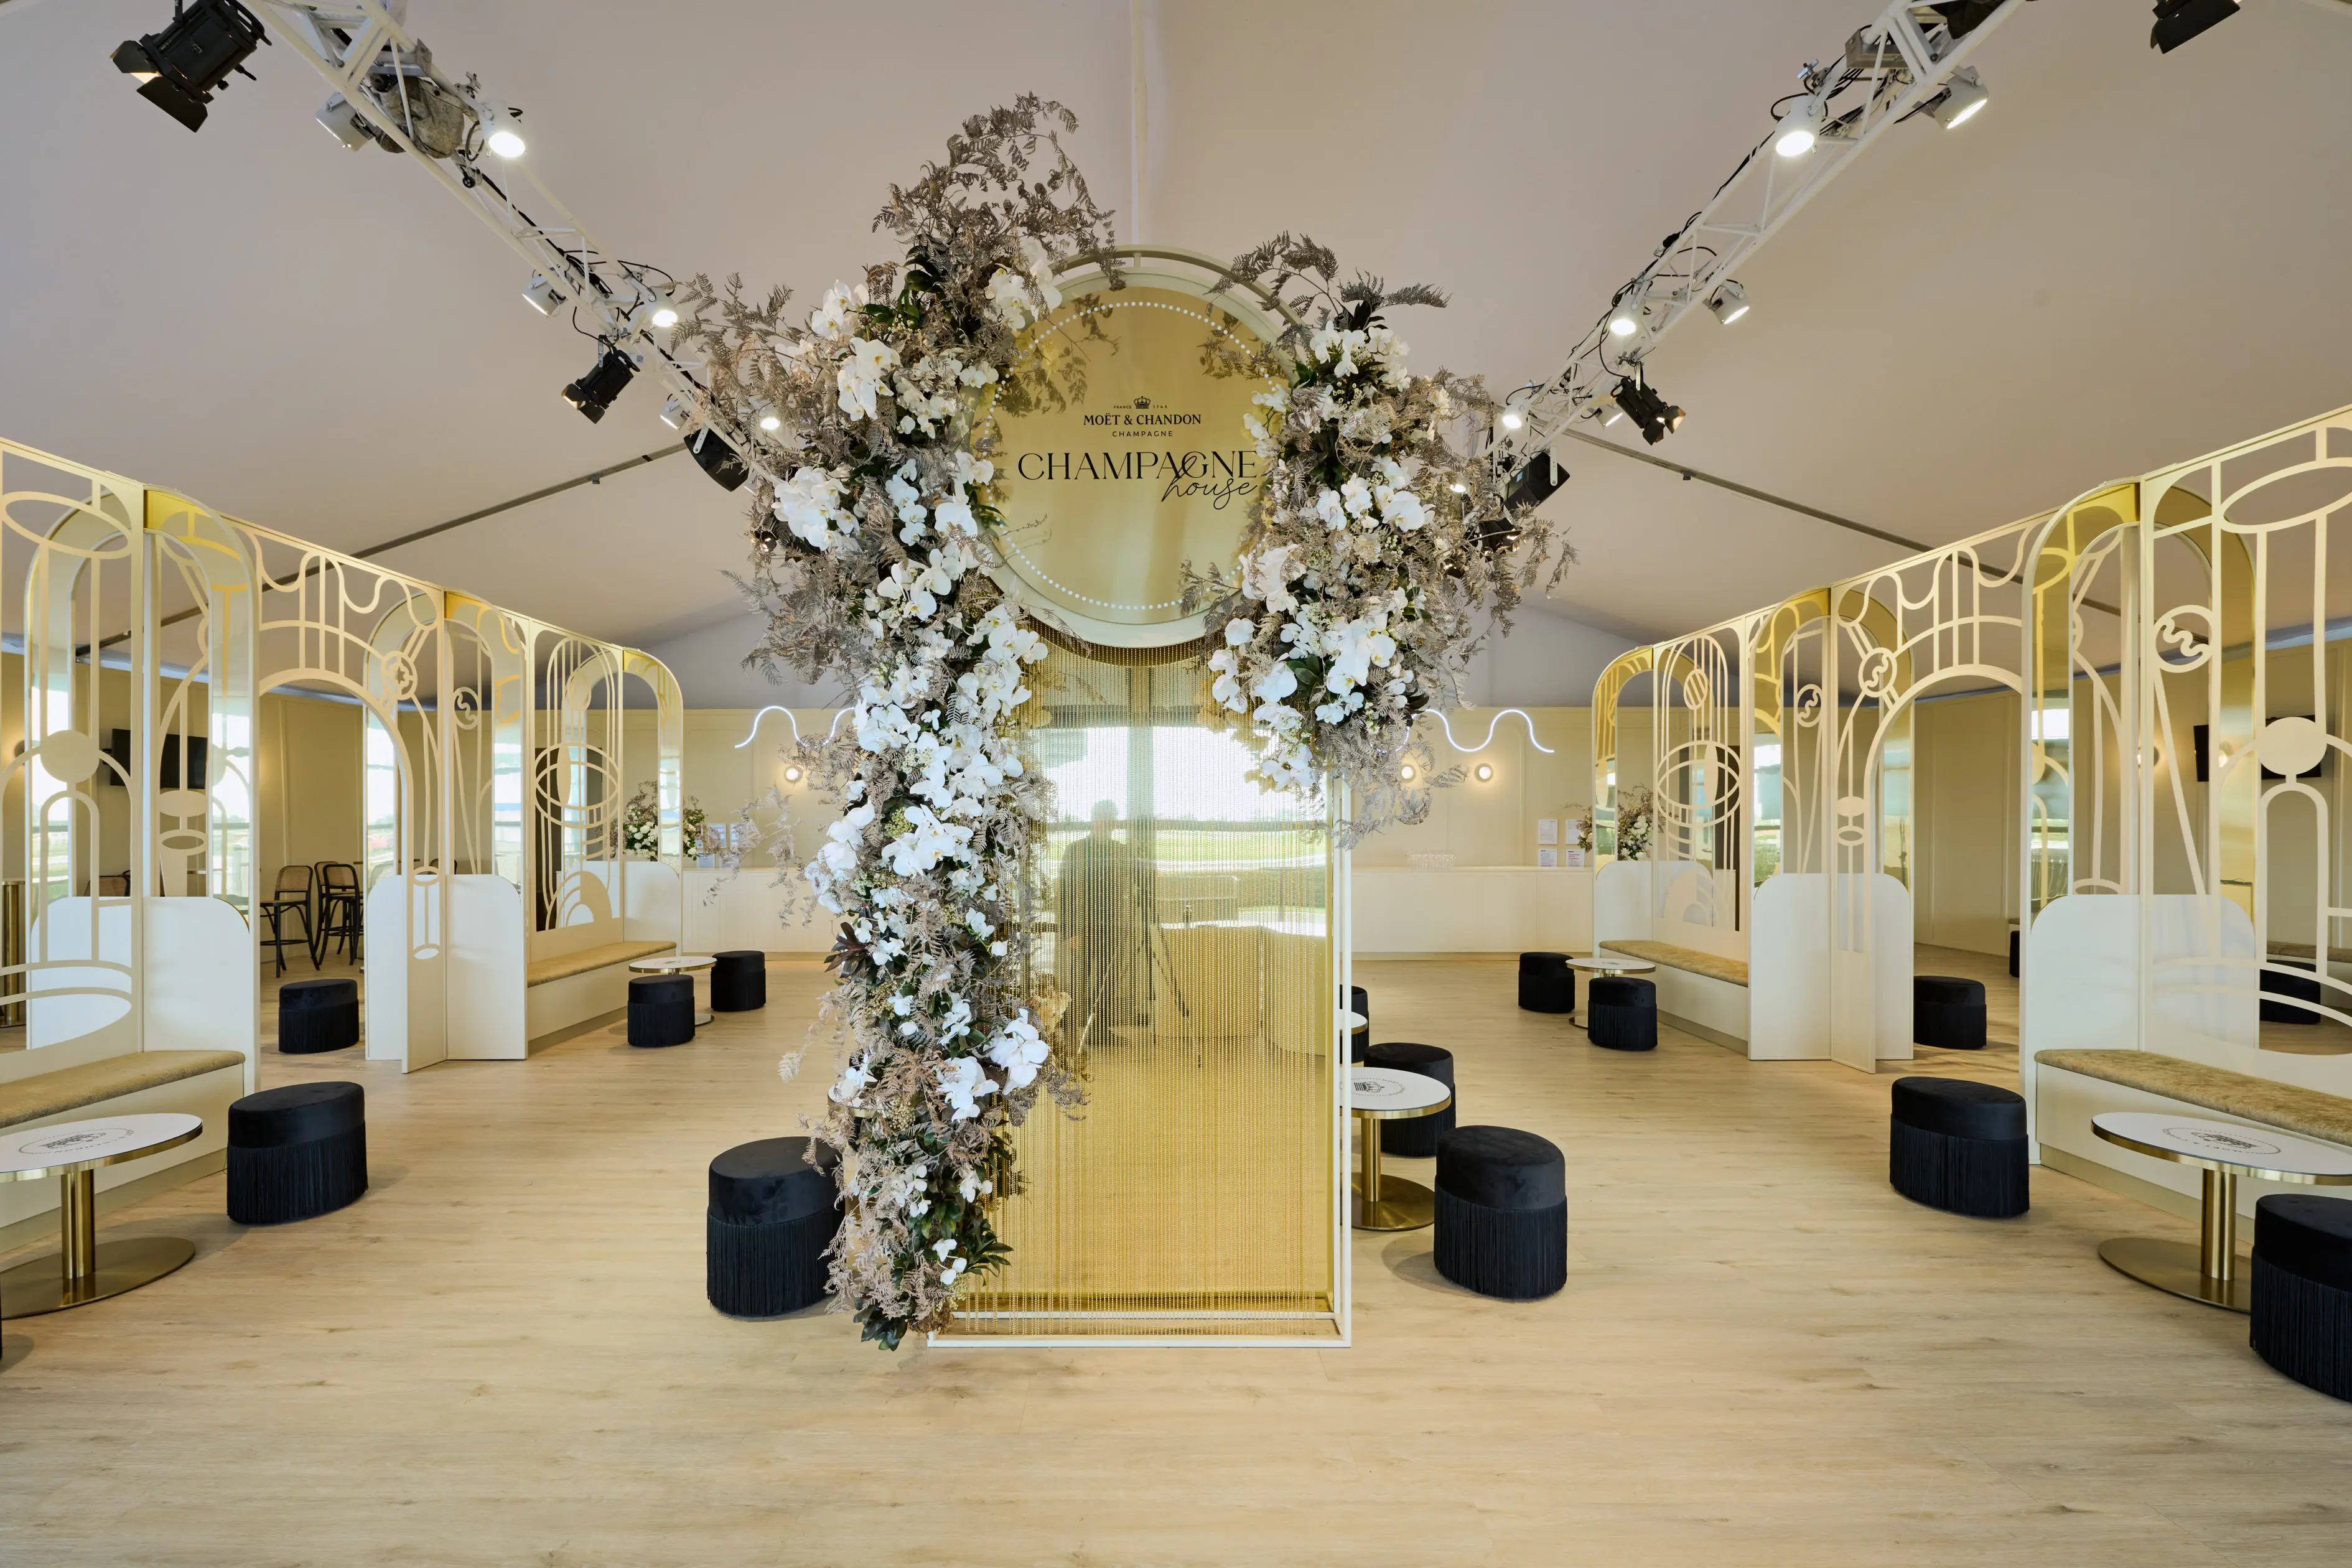 Champagne House at Caulfield Cup - hospitality interior design, event interior, fabrication and build - Caulfield Racecourse, Melbourne, Australia